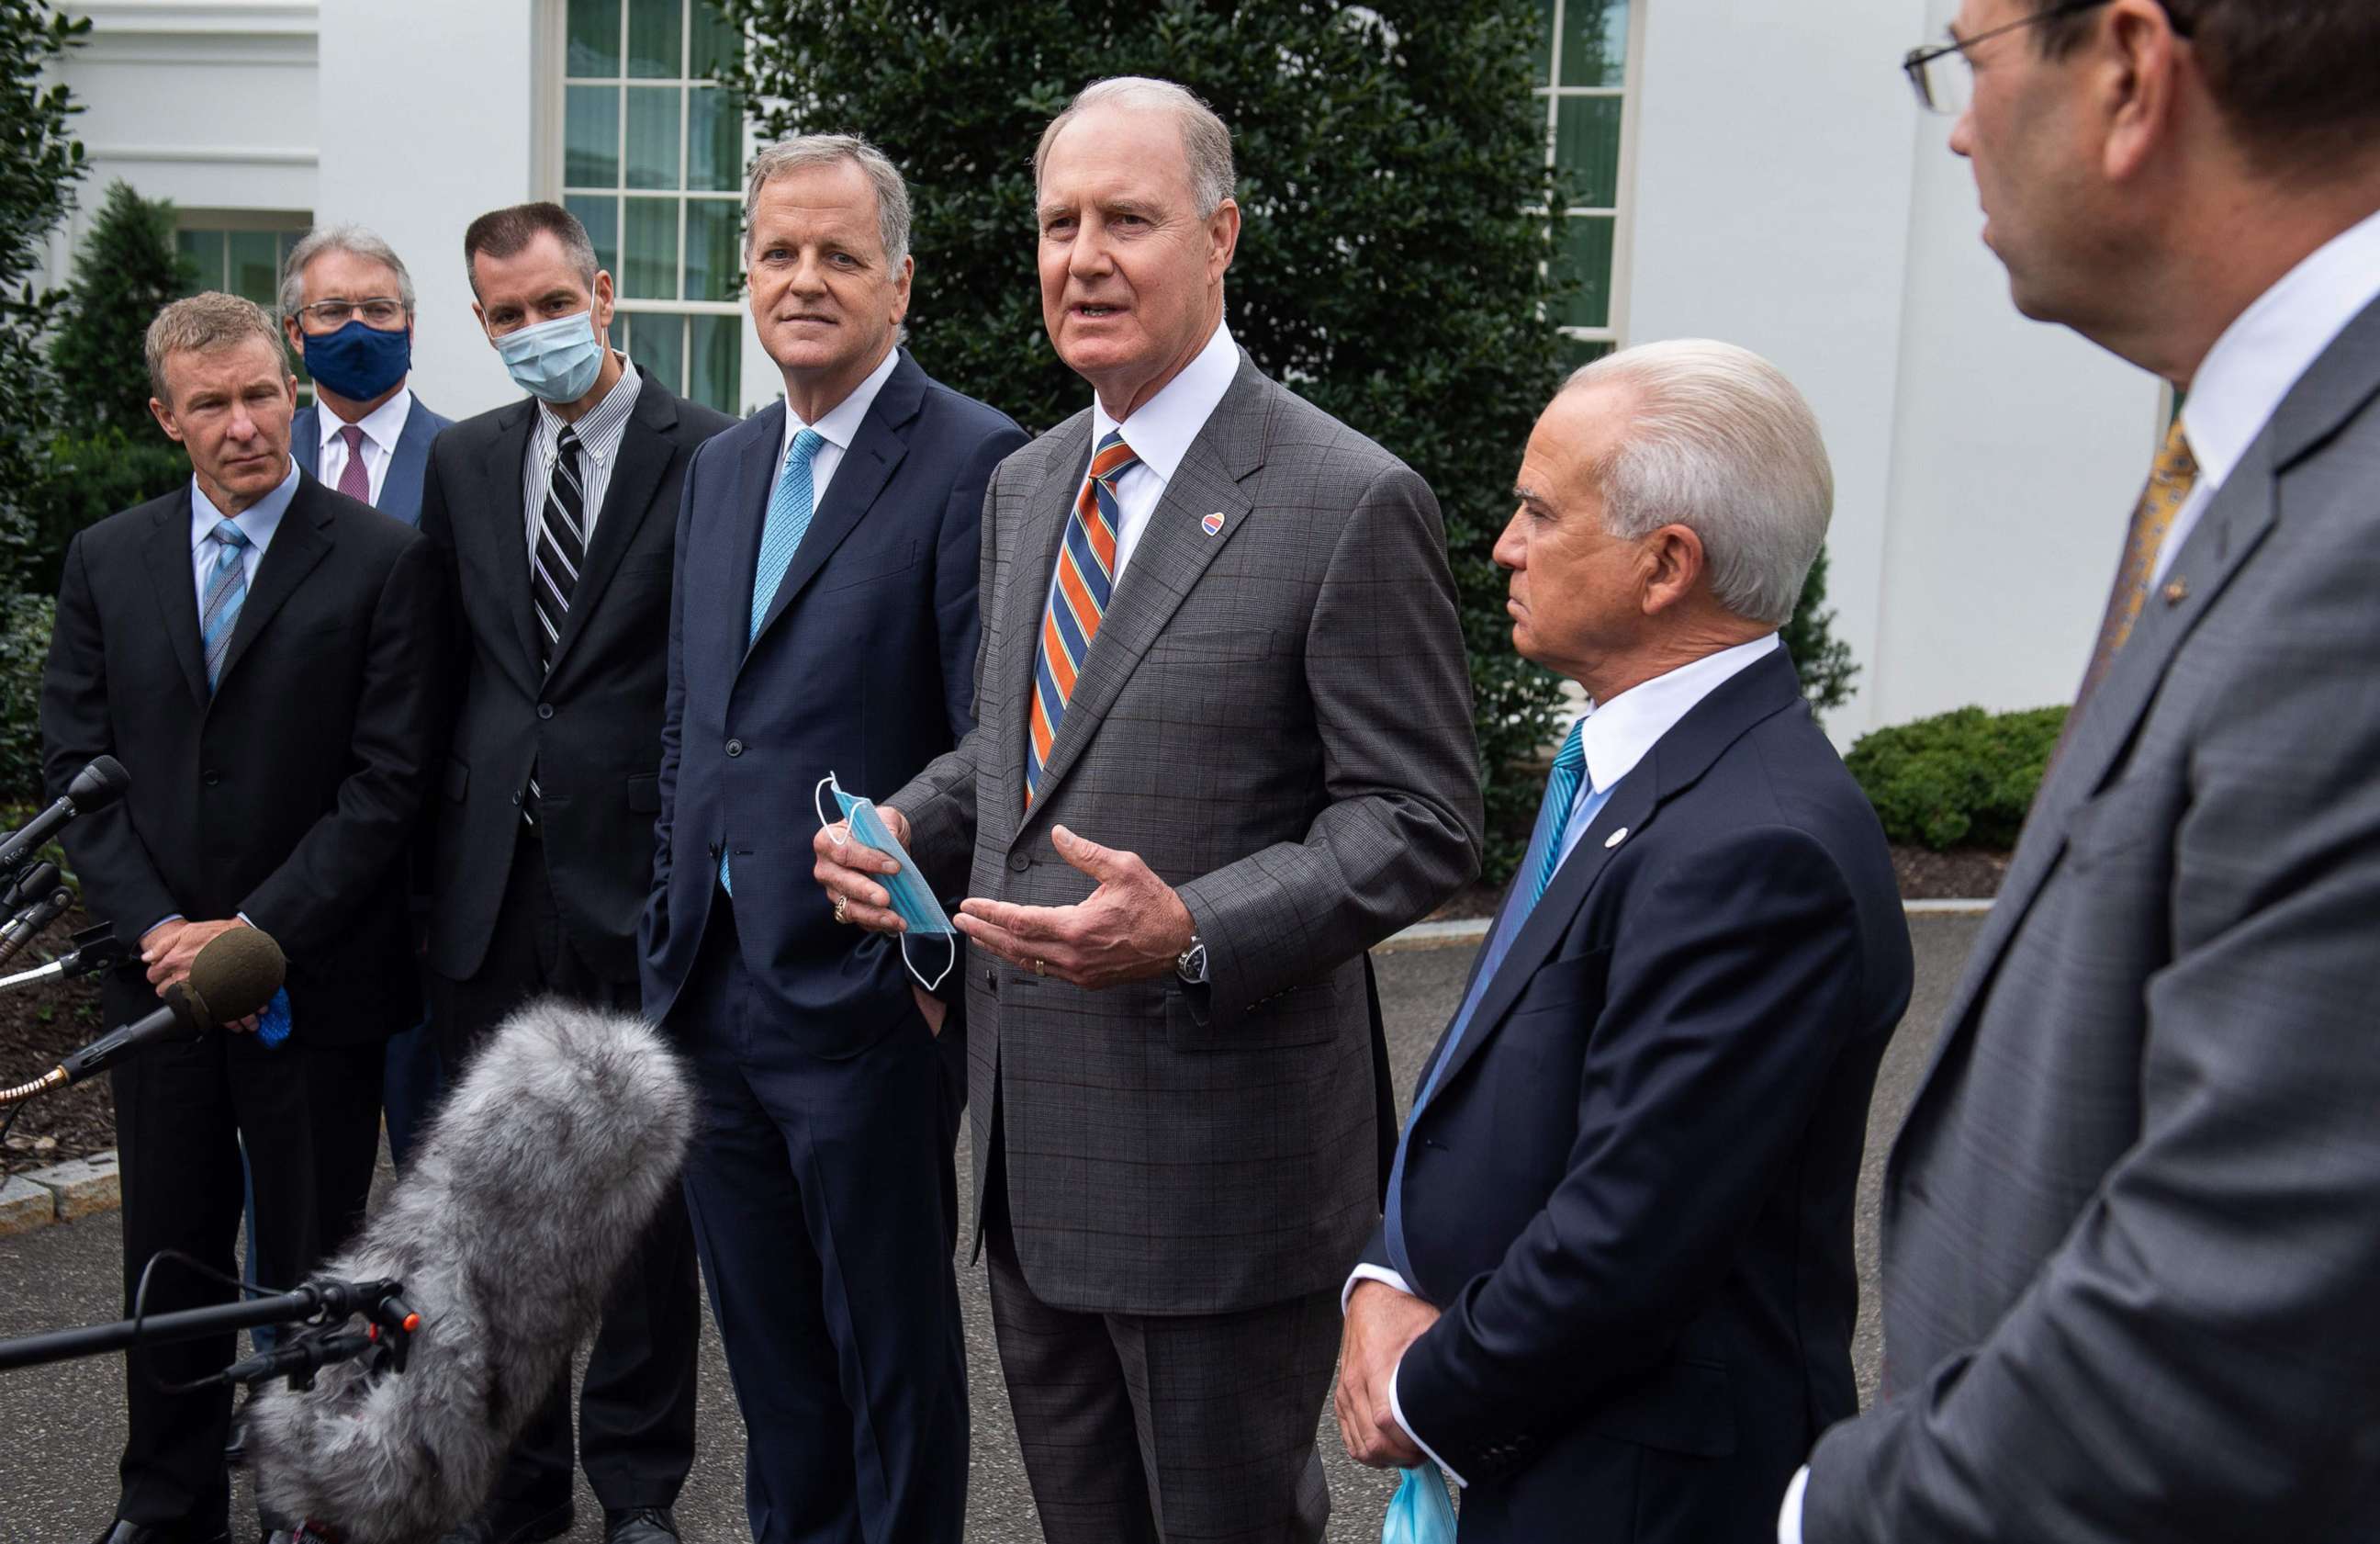 PHOTO: Southwest Airlines Chairman and CEO Gary Kelly, center, speaks alongside other airline executives, following a meeting at the White House about extending economic assistance to the airlines, Sept. 17, 2020.